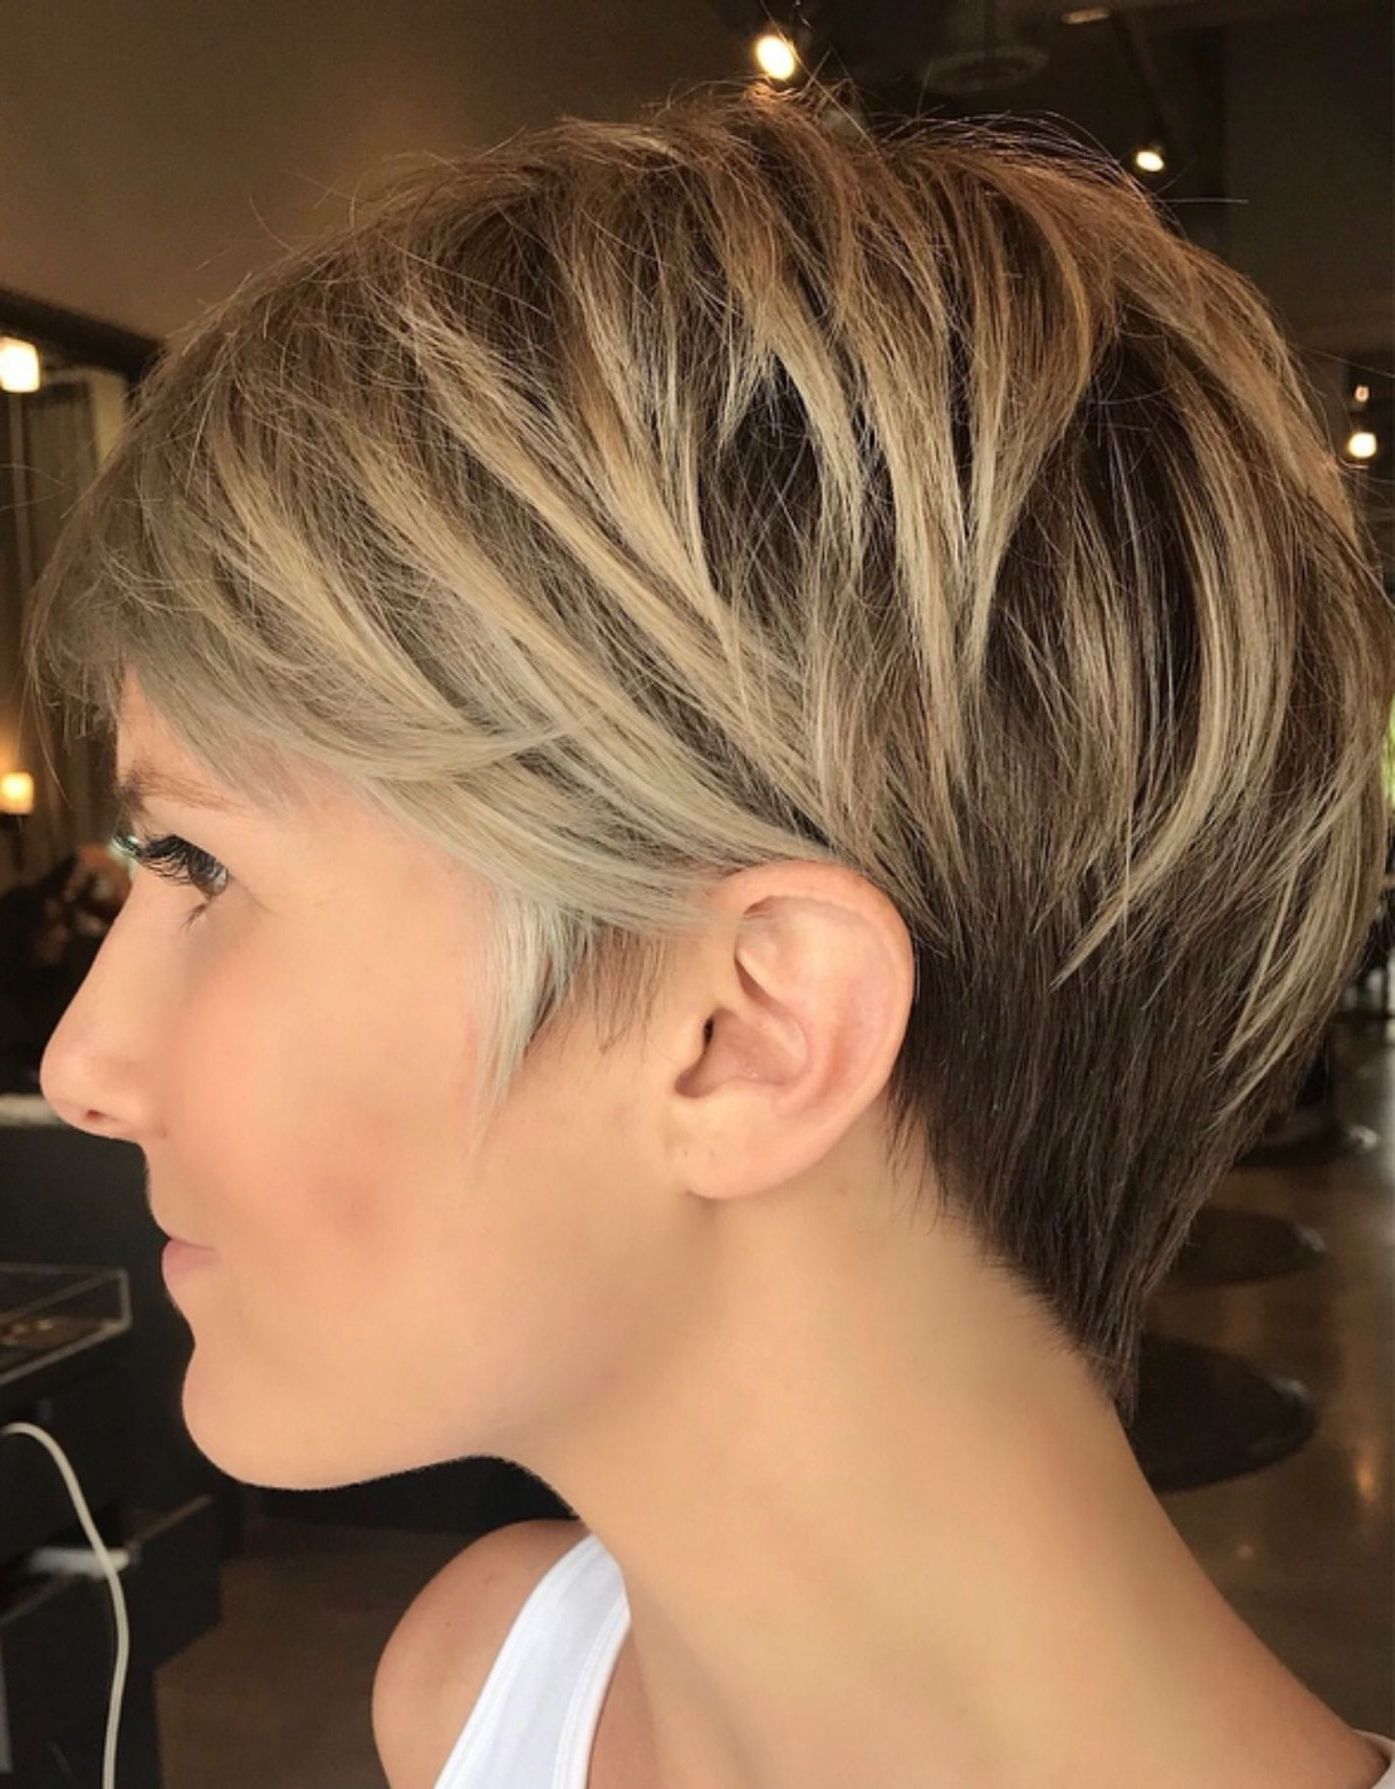 100 Mind Blowing Short Hairstyles For Fine Hair | Hairstyles Throughout Curly Pixie Hairstyles With V Cut Nape (Photo 2 of 25)